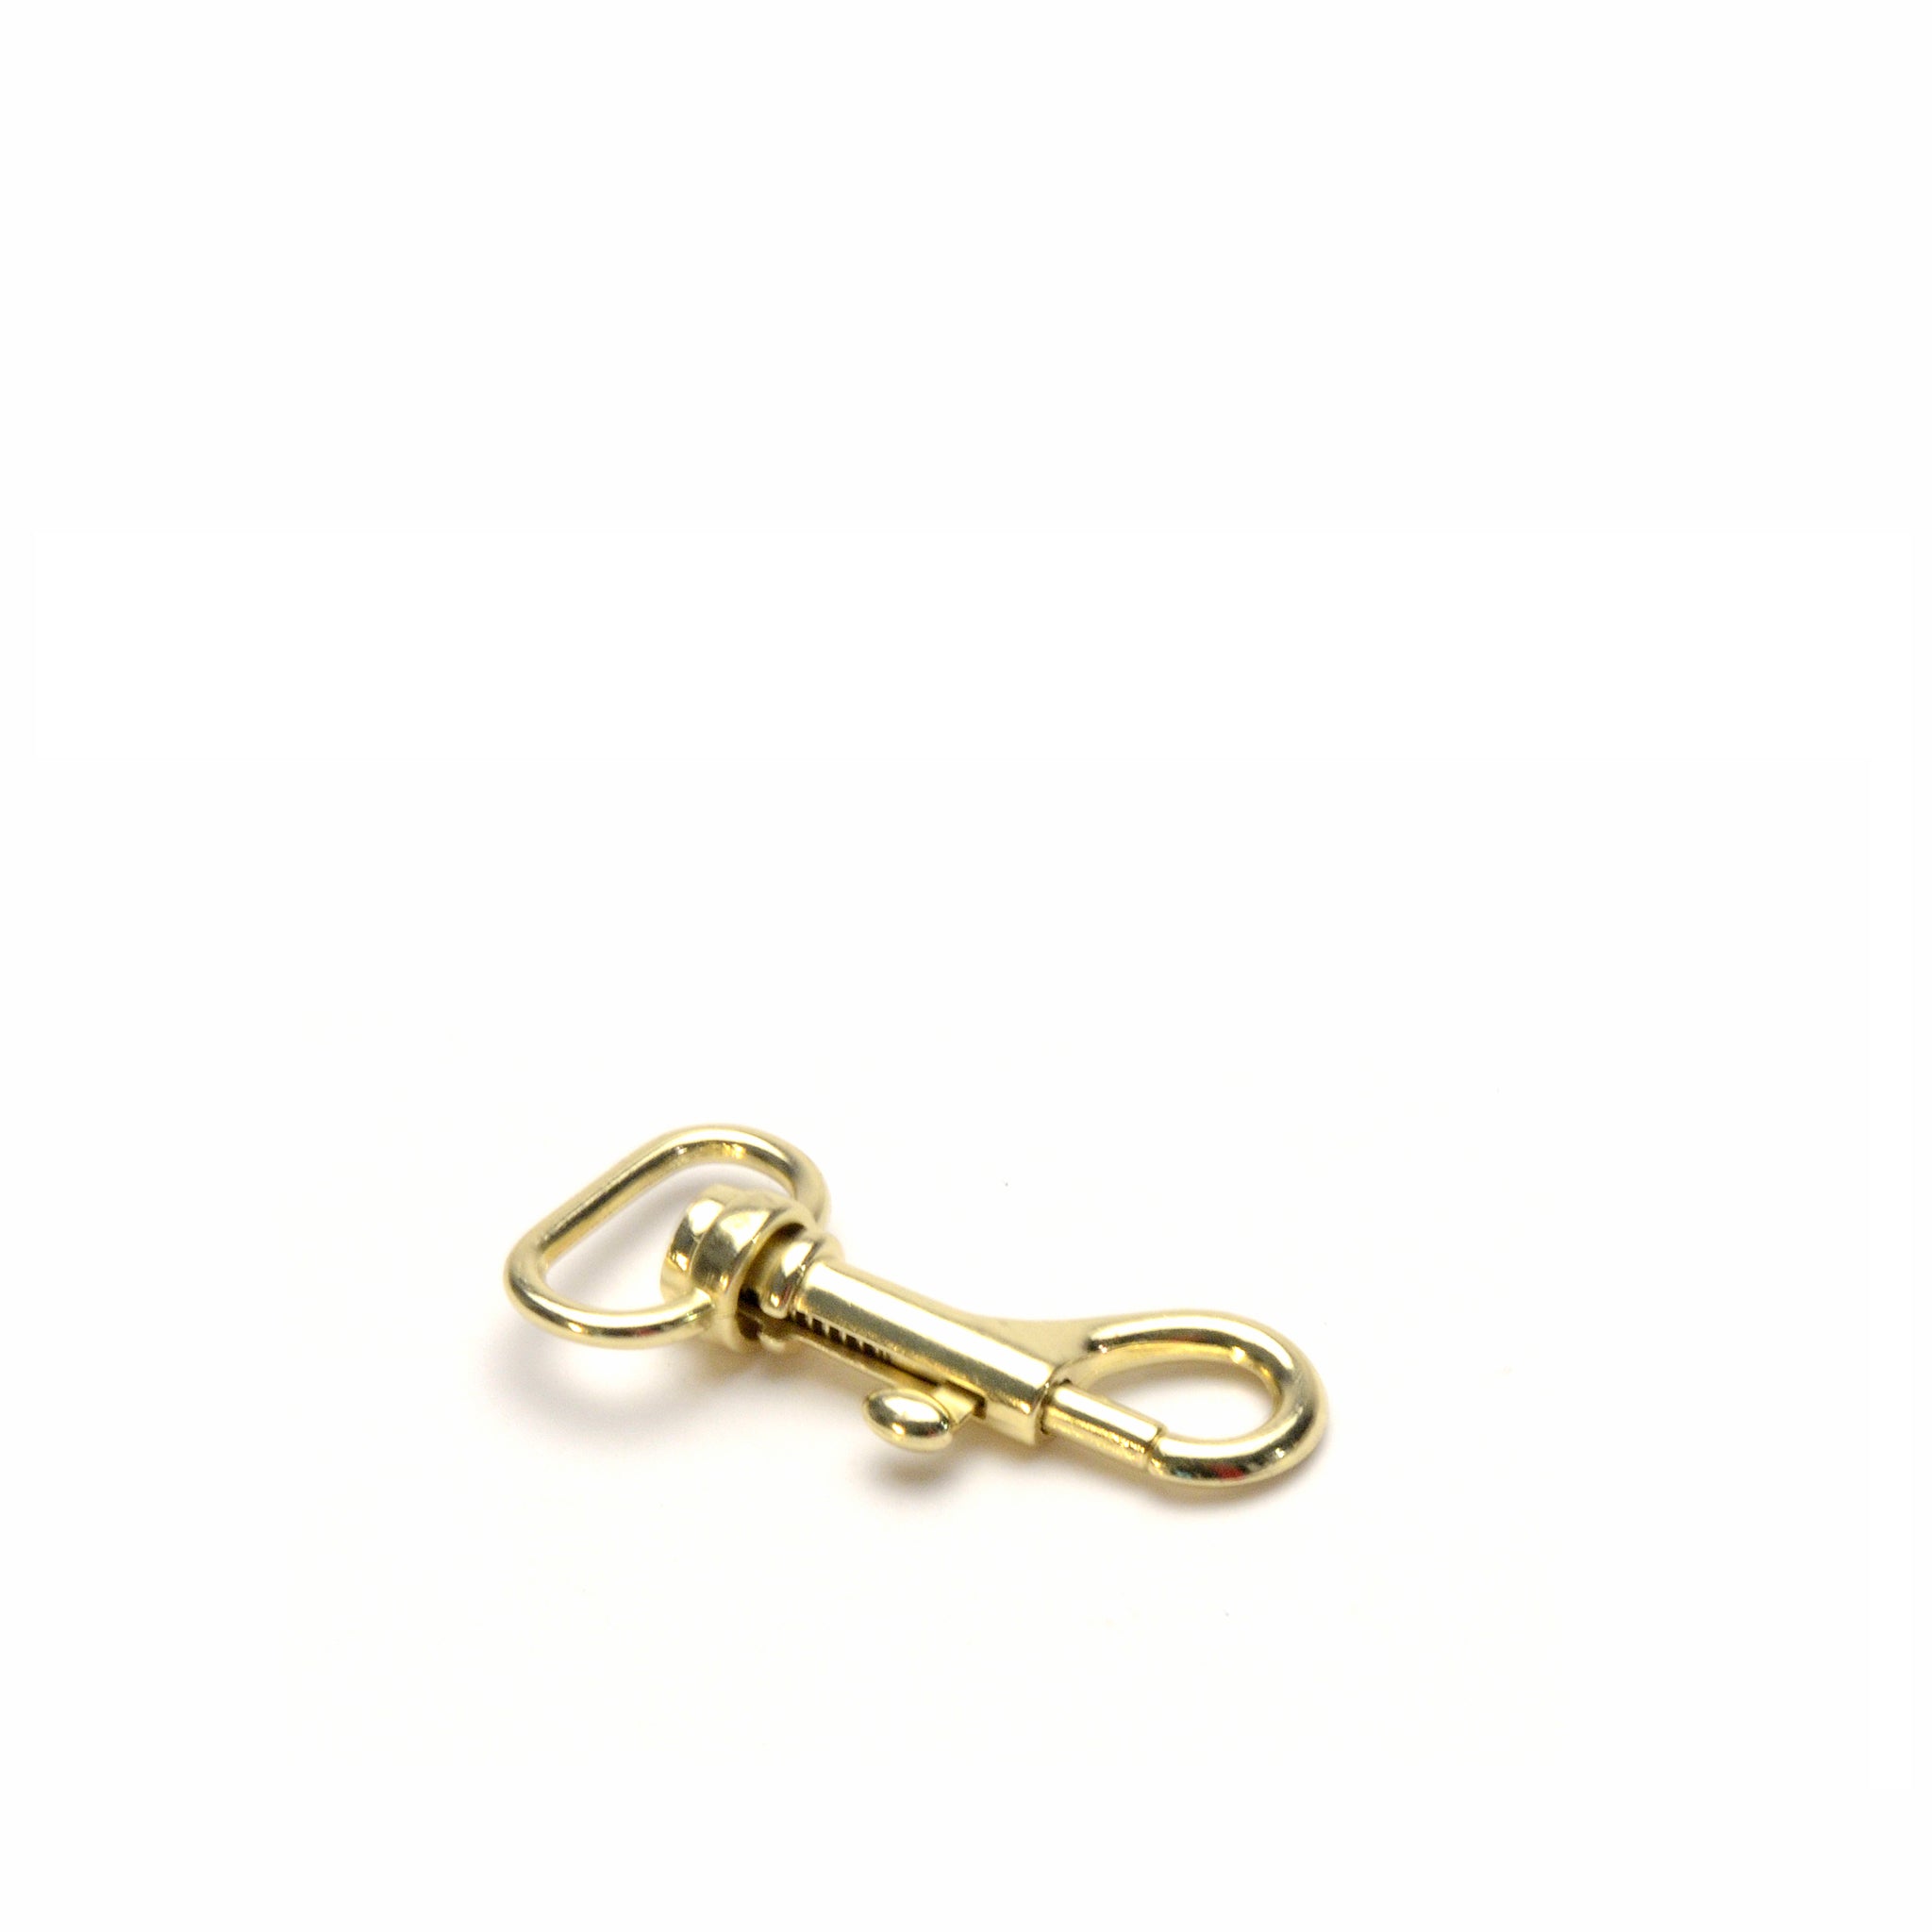 19mm Bag/All Purpose Swivel Clip - Brass from Identity Leathercraft